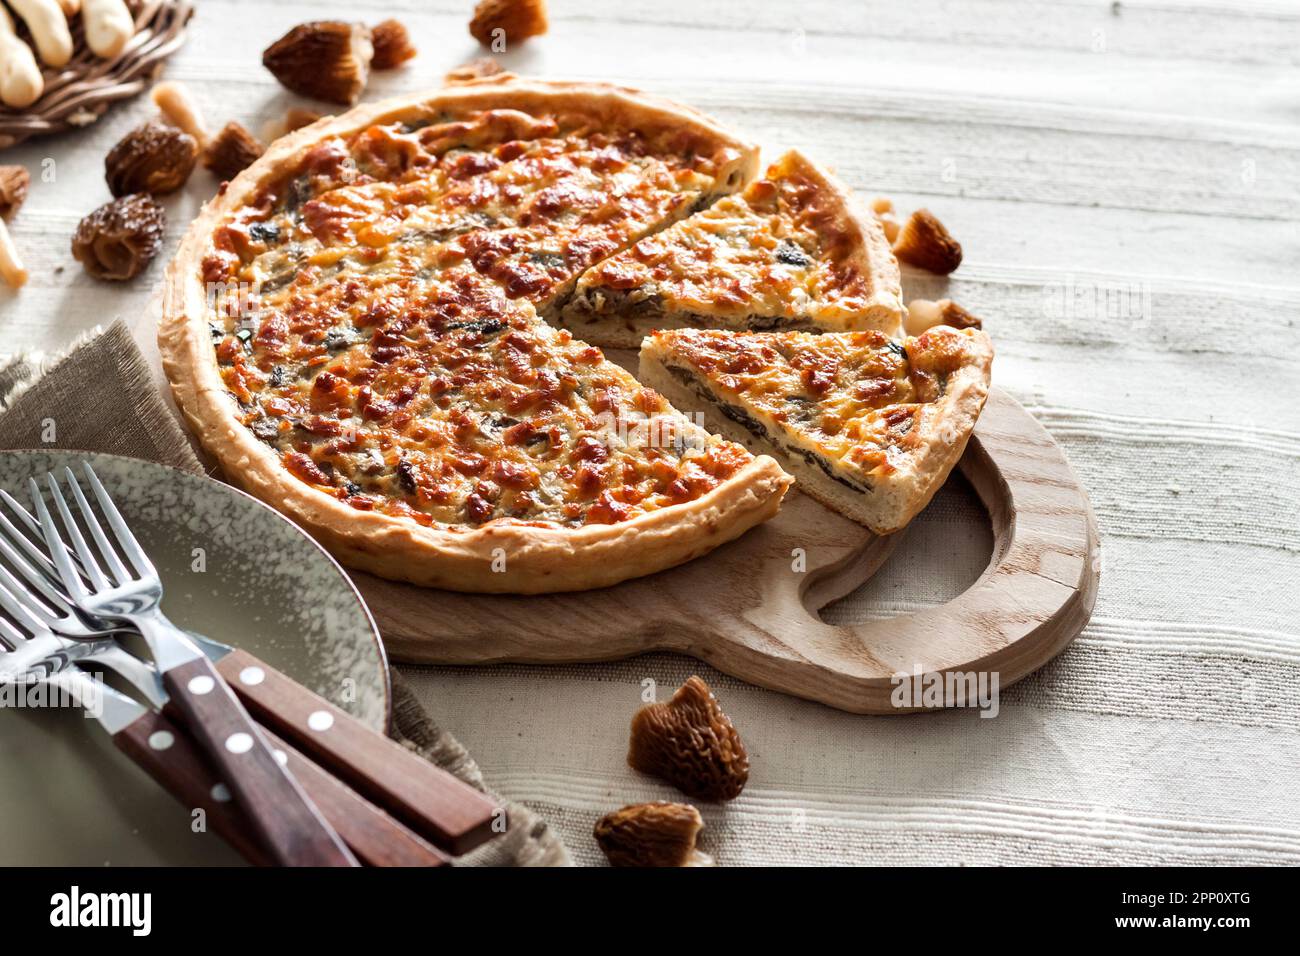 Quiche – open tart pie with morel mushrooms, onion and mozzarella cheese on wooden cutting board Stock Photo